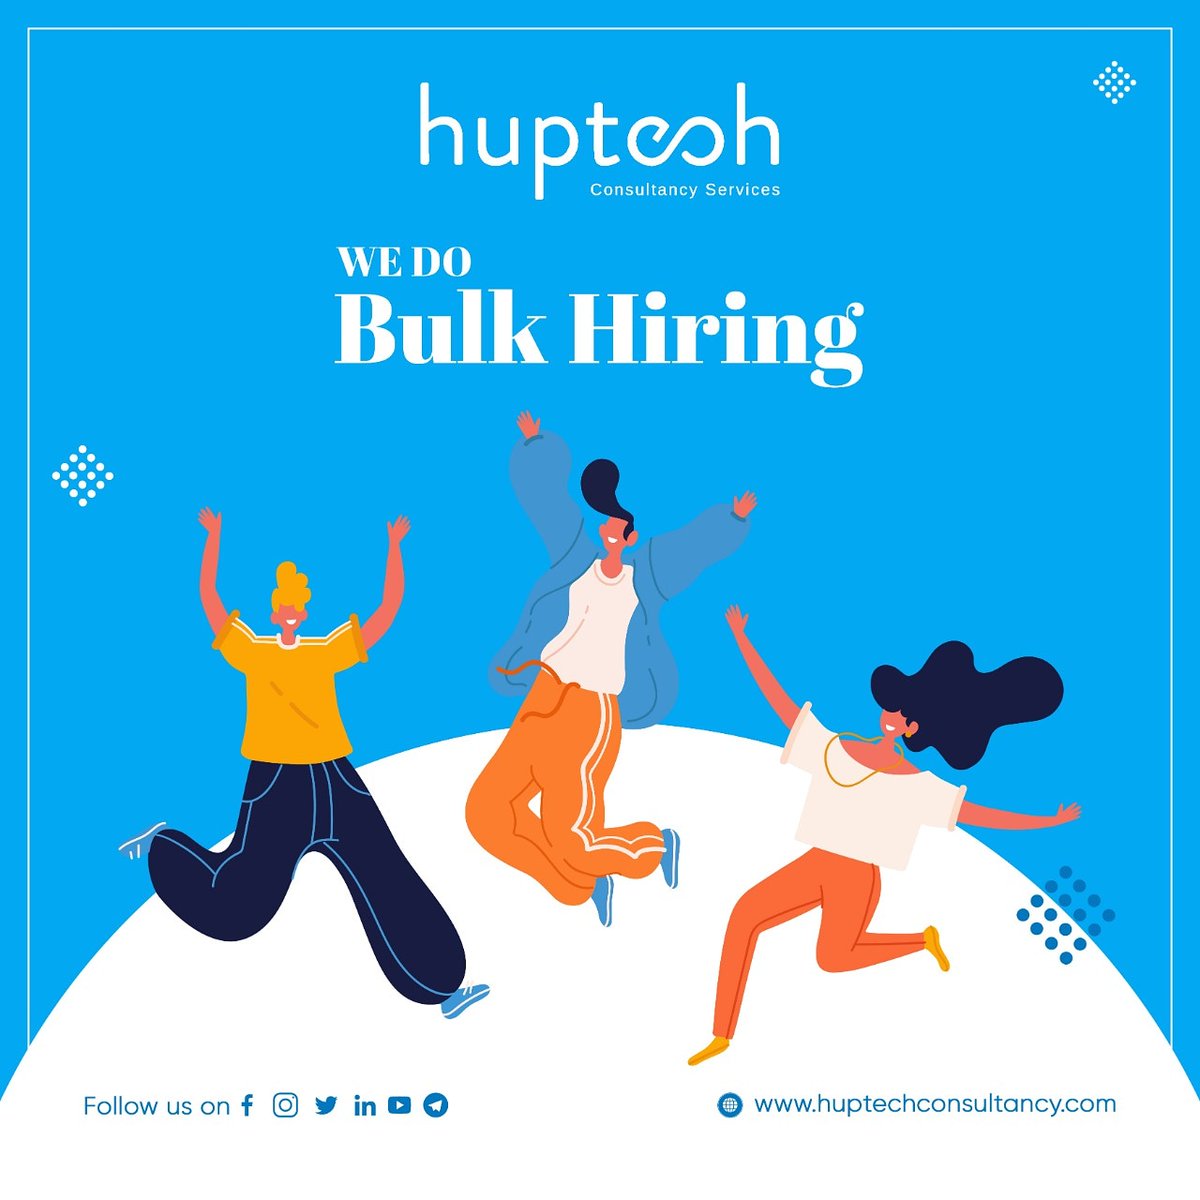 We are Specialised in #bulkhiring 

Contact us for your #bulkhiring 
Contact us at contact@huptechconsultancy.com or +91 9979698407

#ceo #founder #director #itcompanies #itsector #itjobs #cto #hr #management #flexibletiming #5daysworking #helpinghand #lookingforjobchange